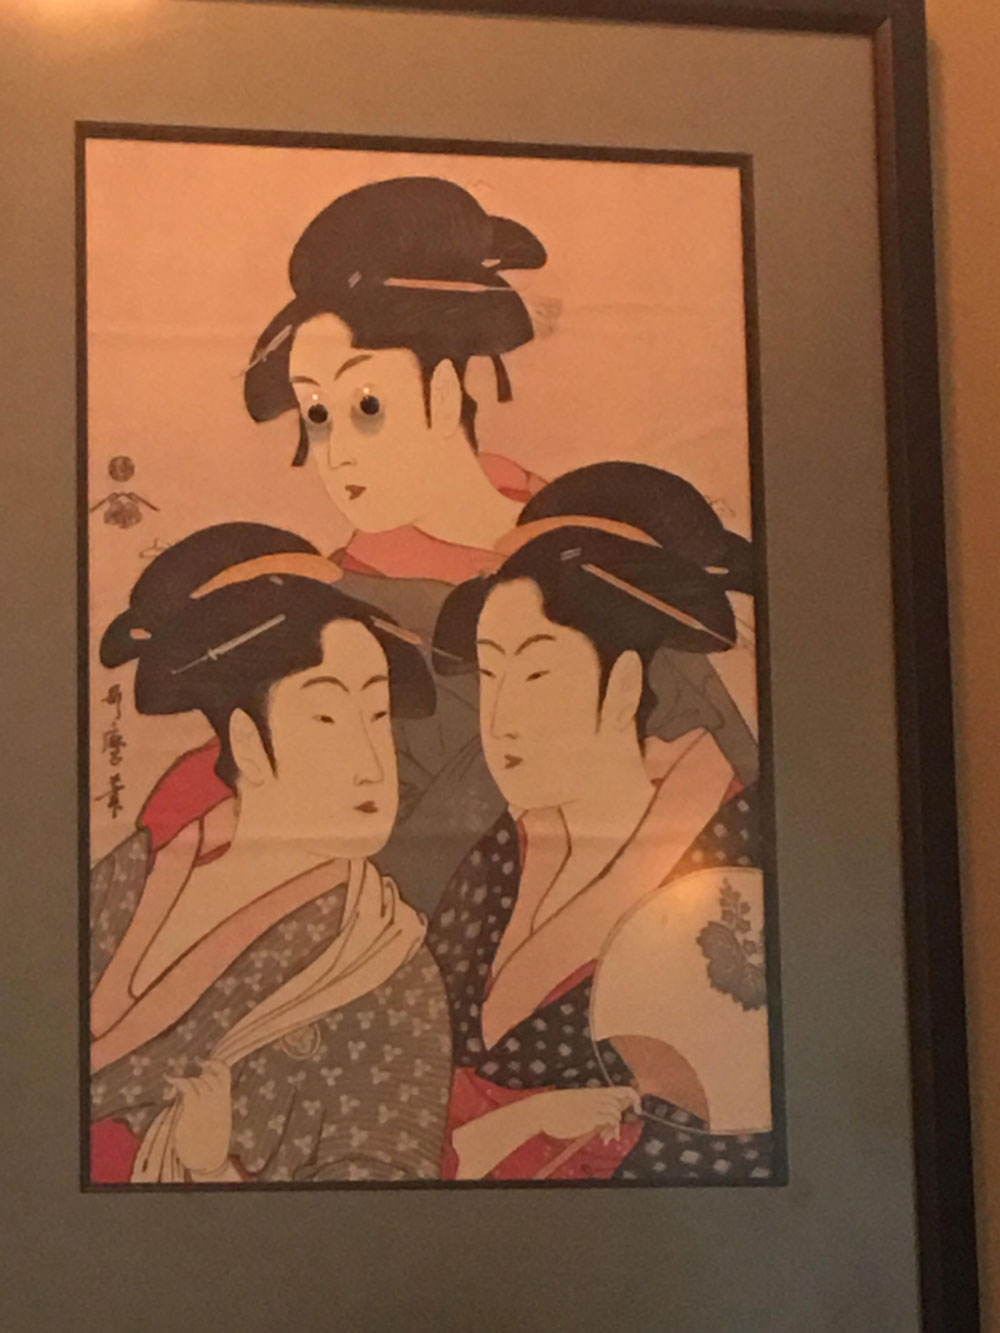 Eating sushi with my best friend when we saw this in the restaurant...